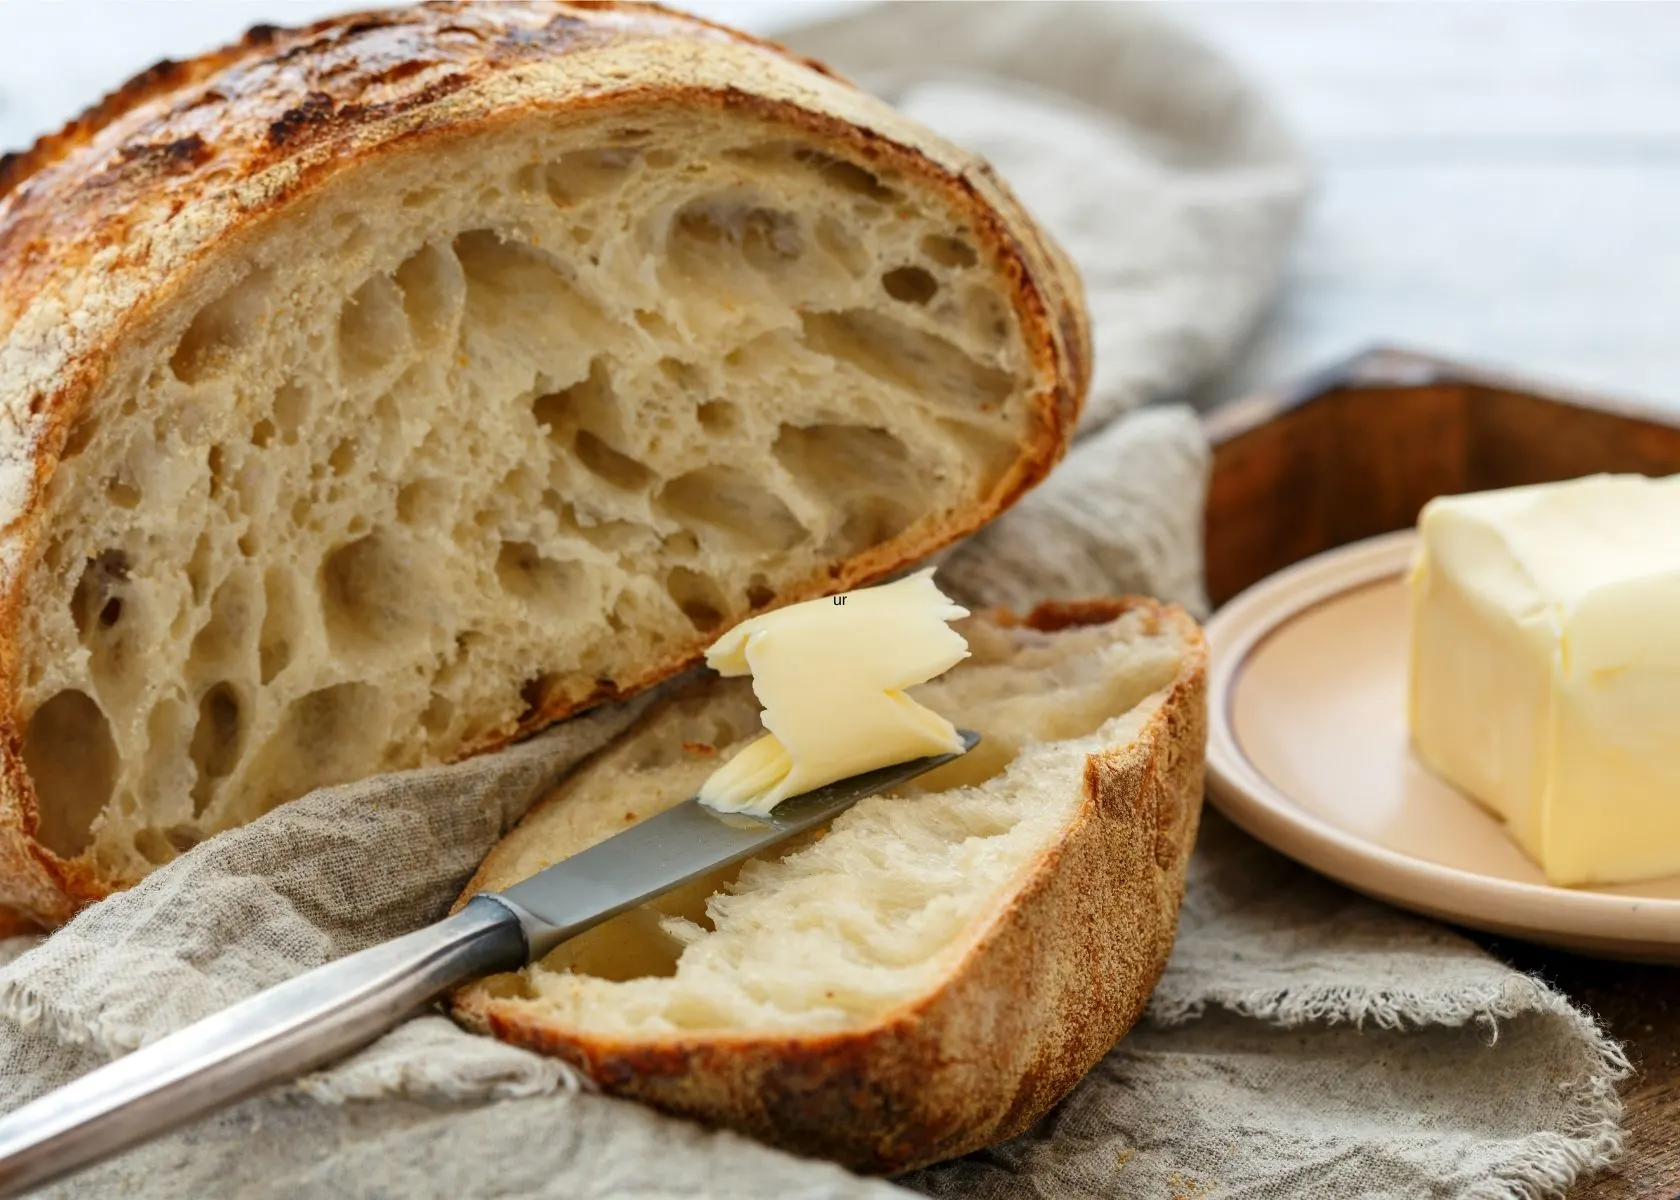 Butter is spread on a loaf of rustic crusty bread next to dish with butter.